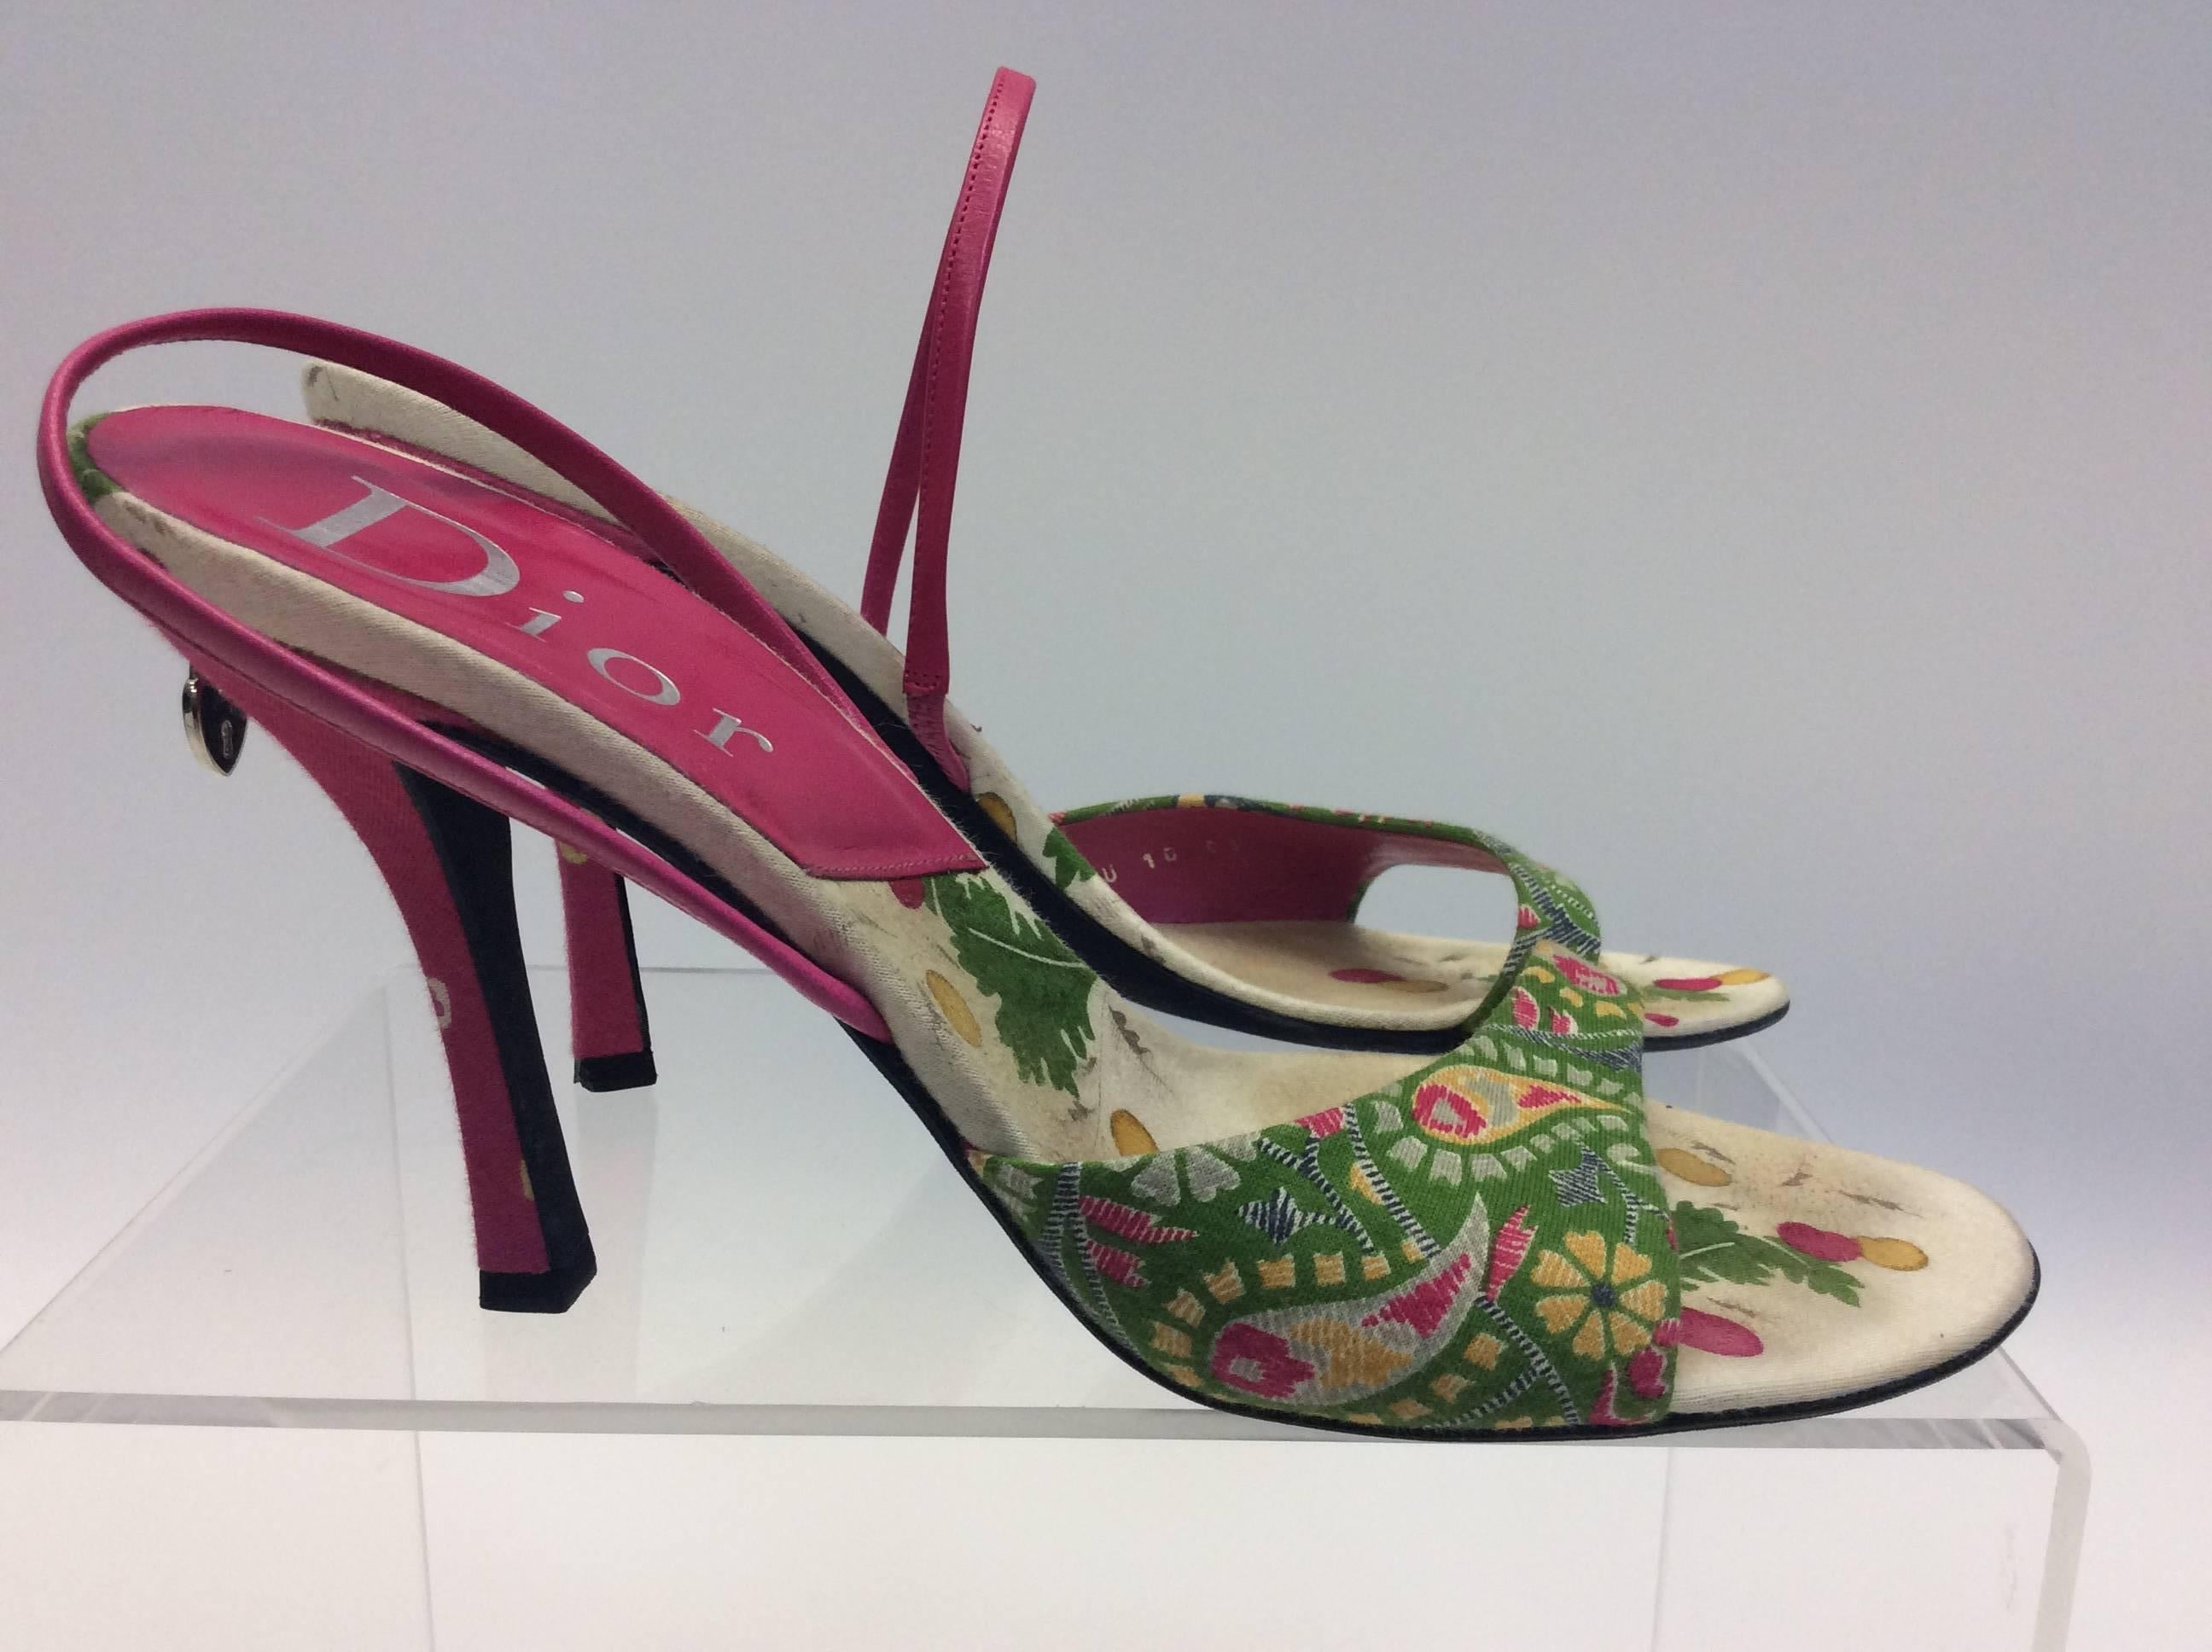 Christian Dior Floral Print Heels In Good Condition For Sale In Narberth, PA